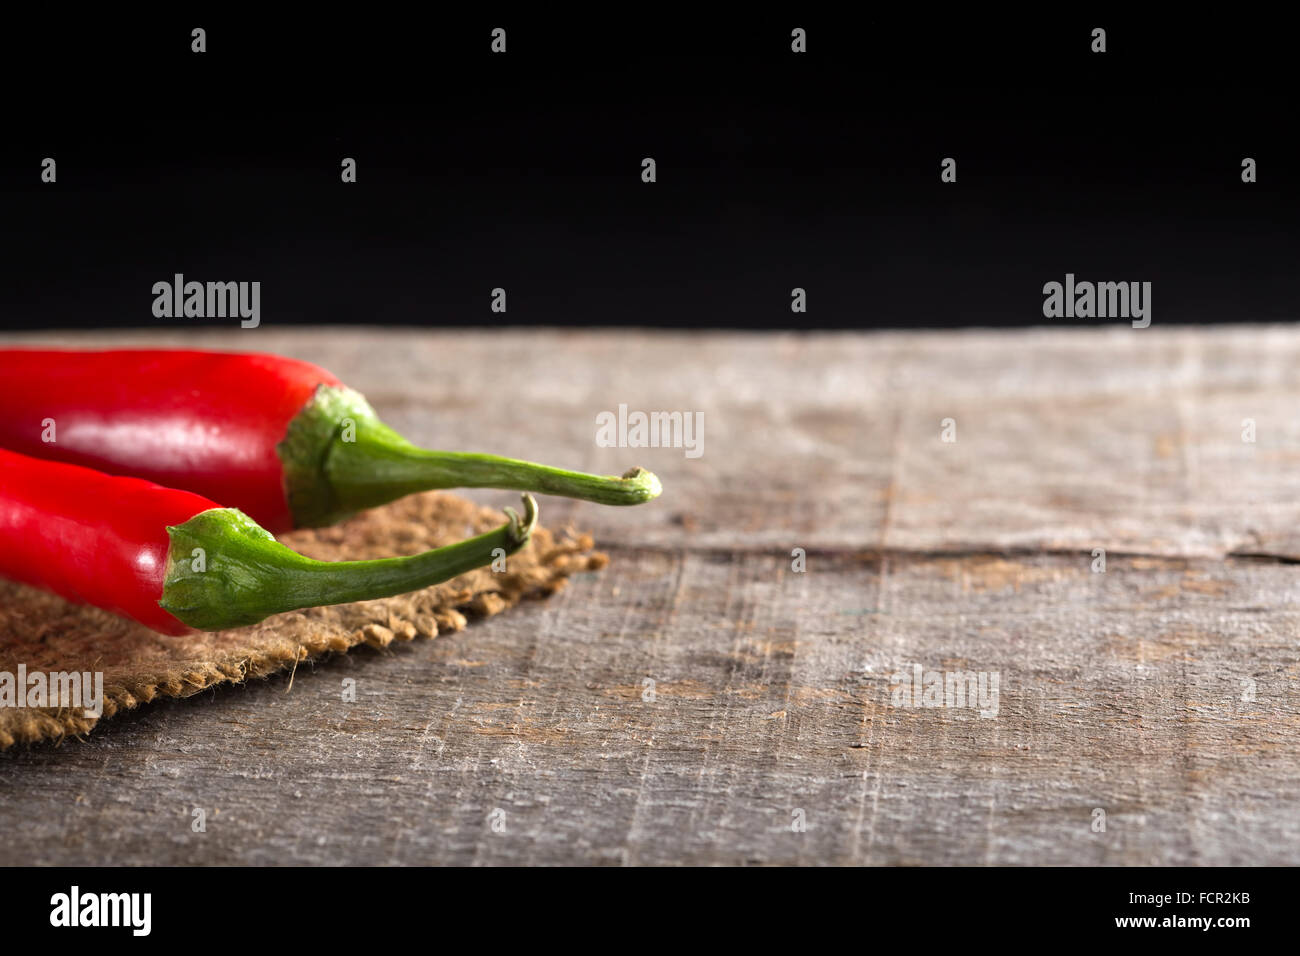 Red chili peppers on a sackcloth Stock Photo